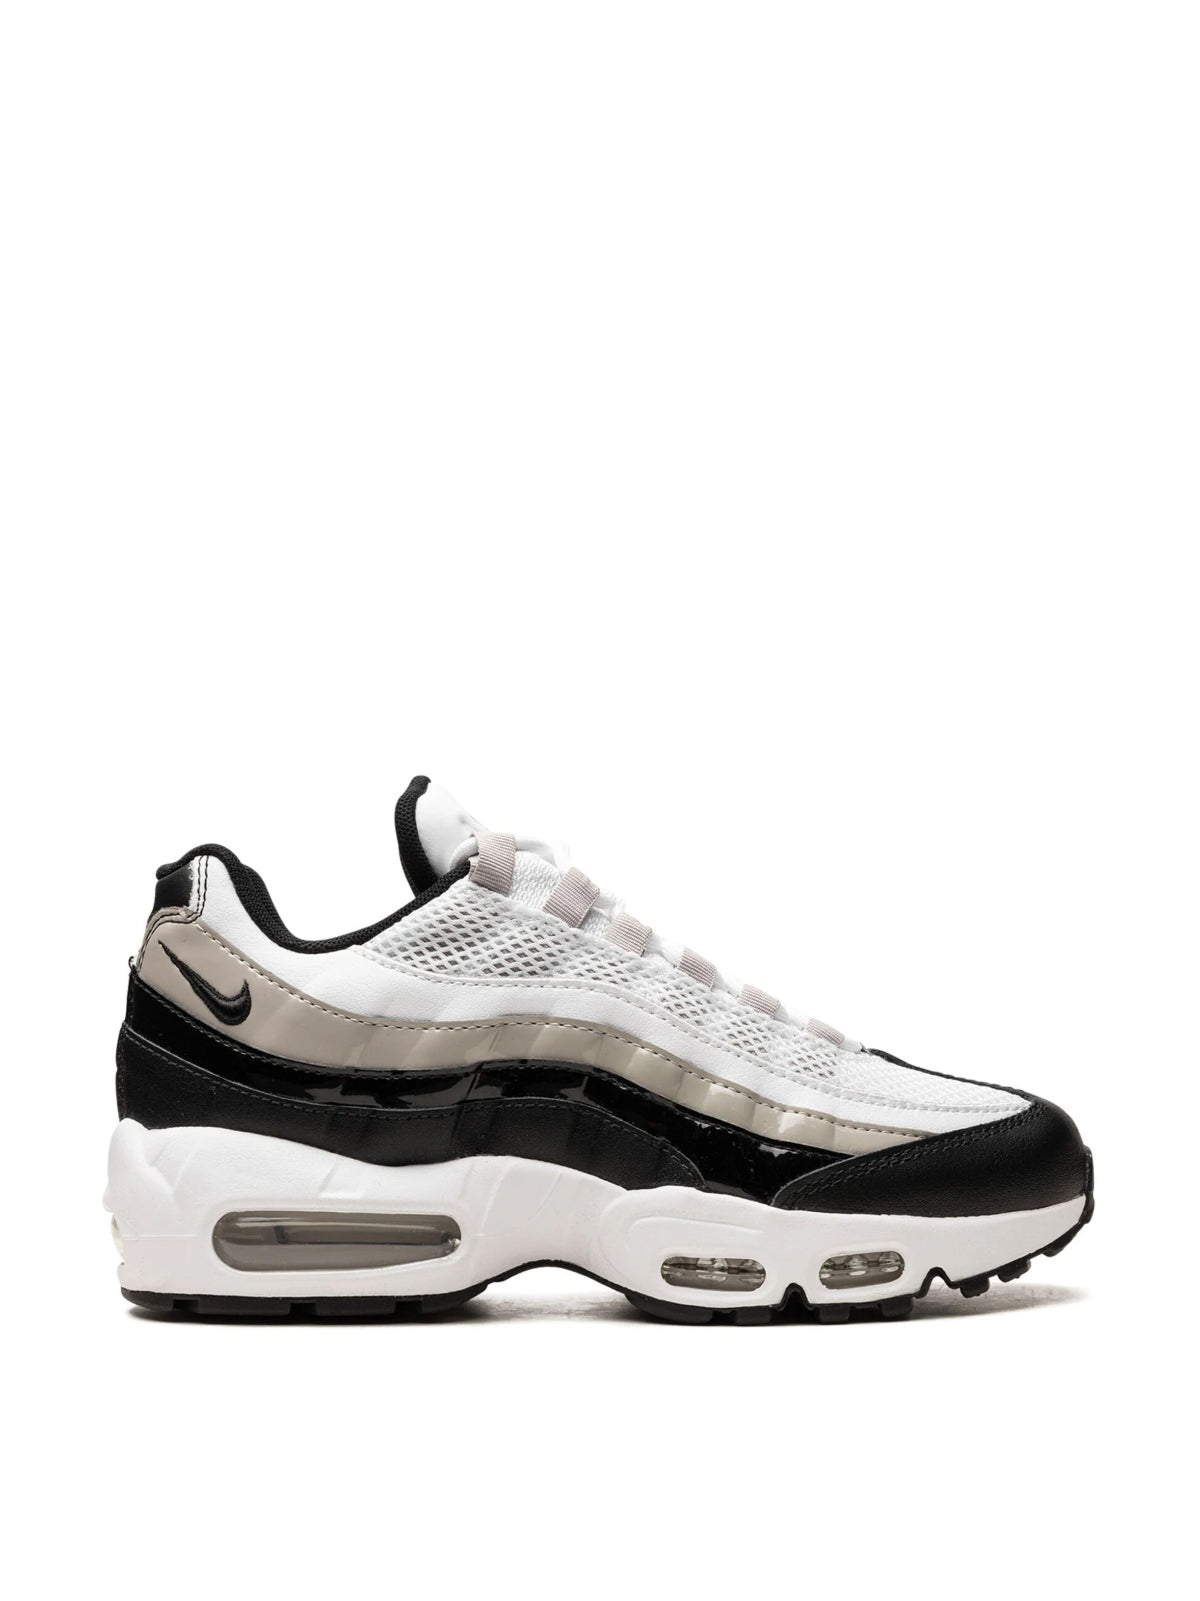 Nike-OUTLET-SALE-Air Max 95 Sneakers-ARCHIVIST